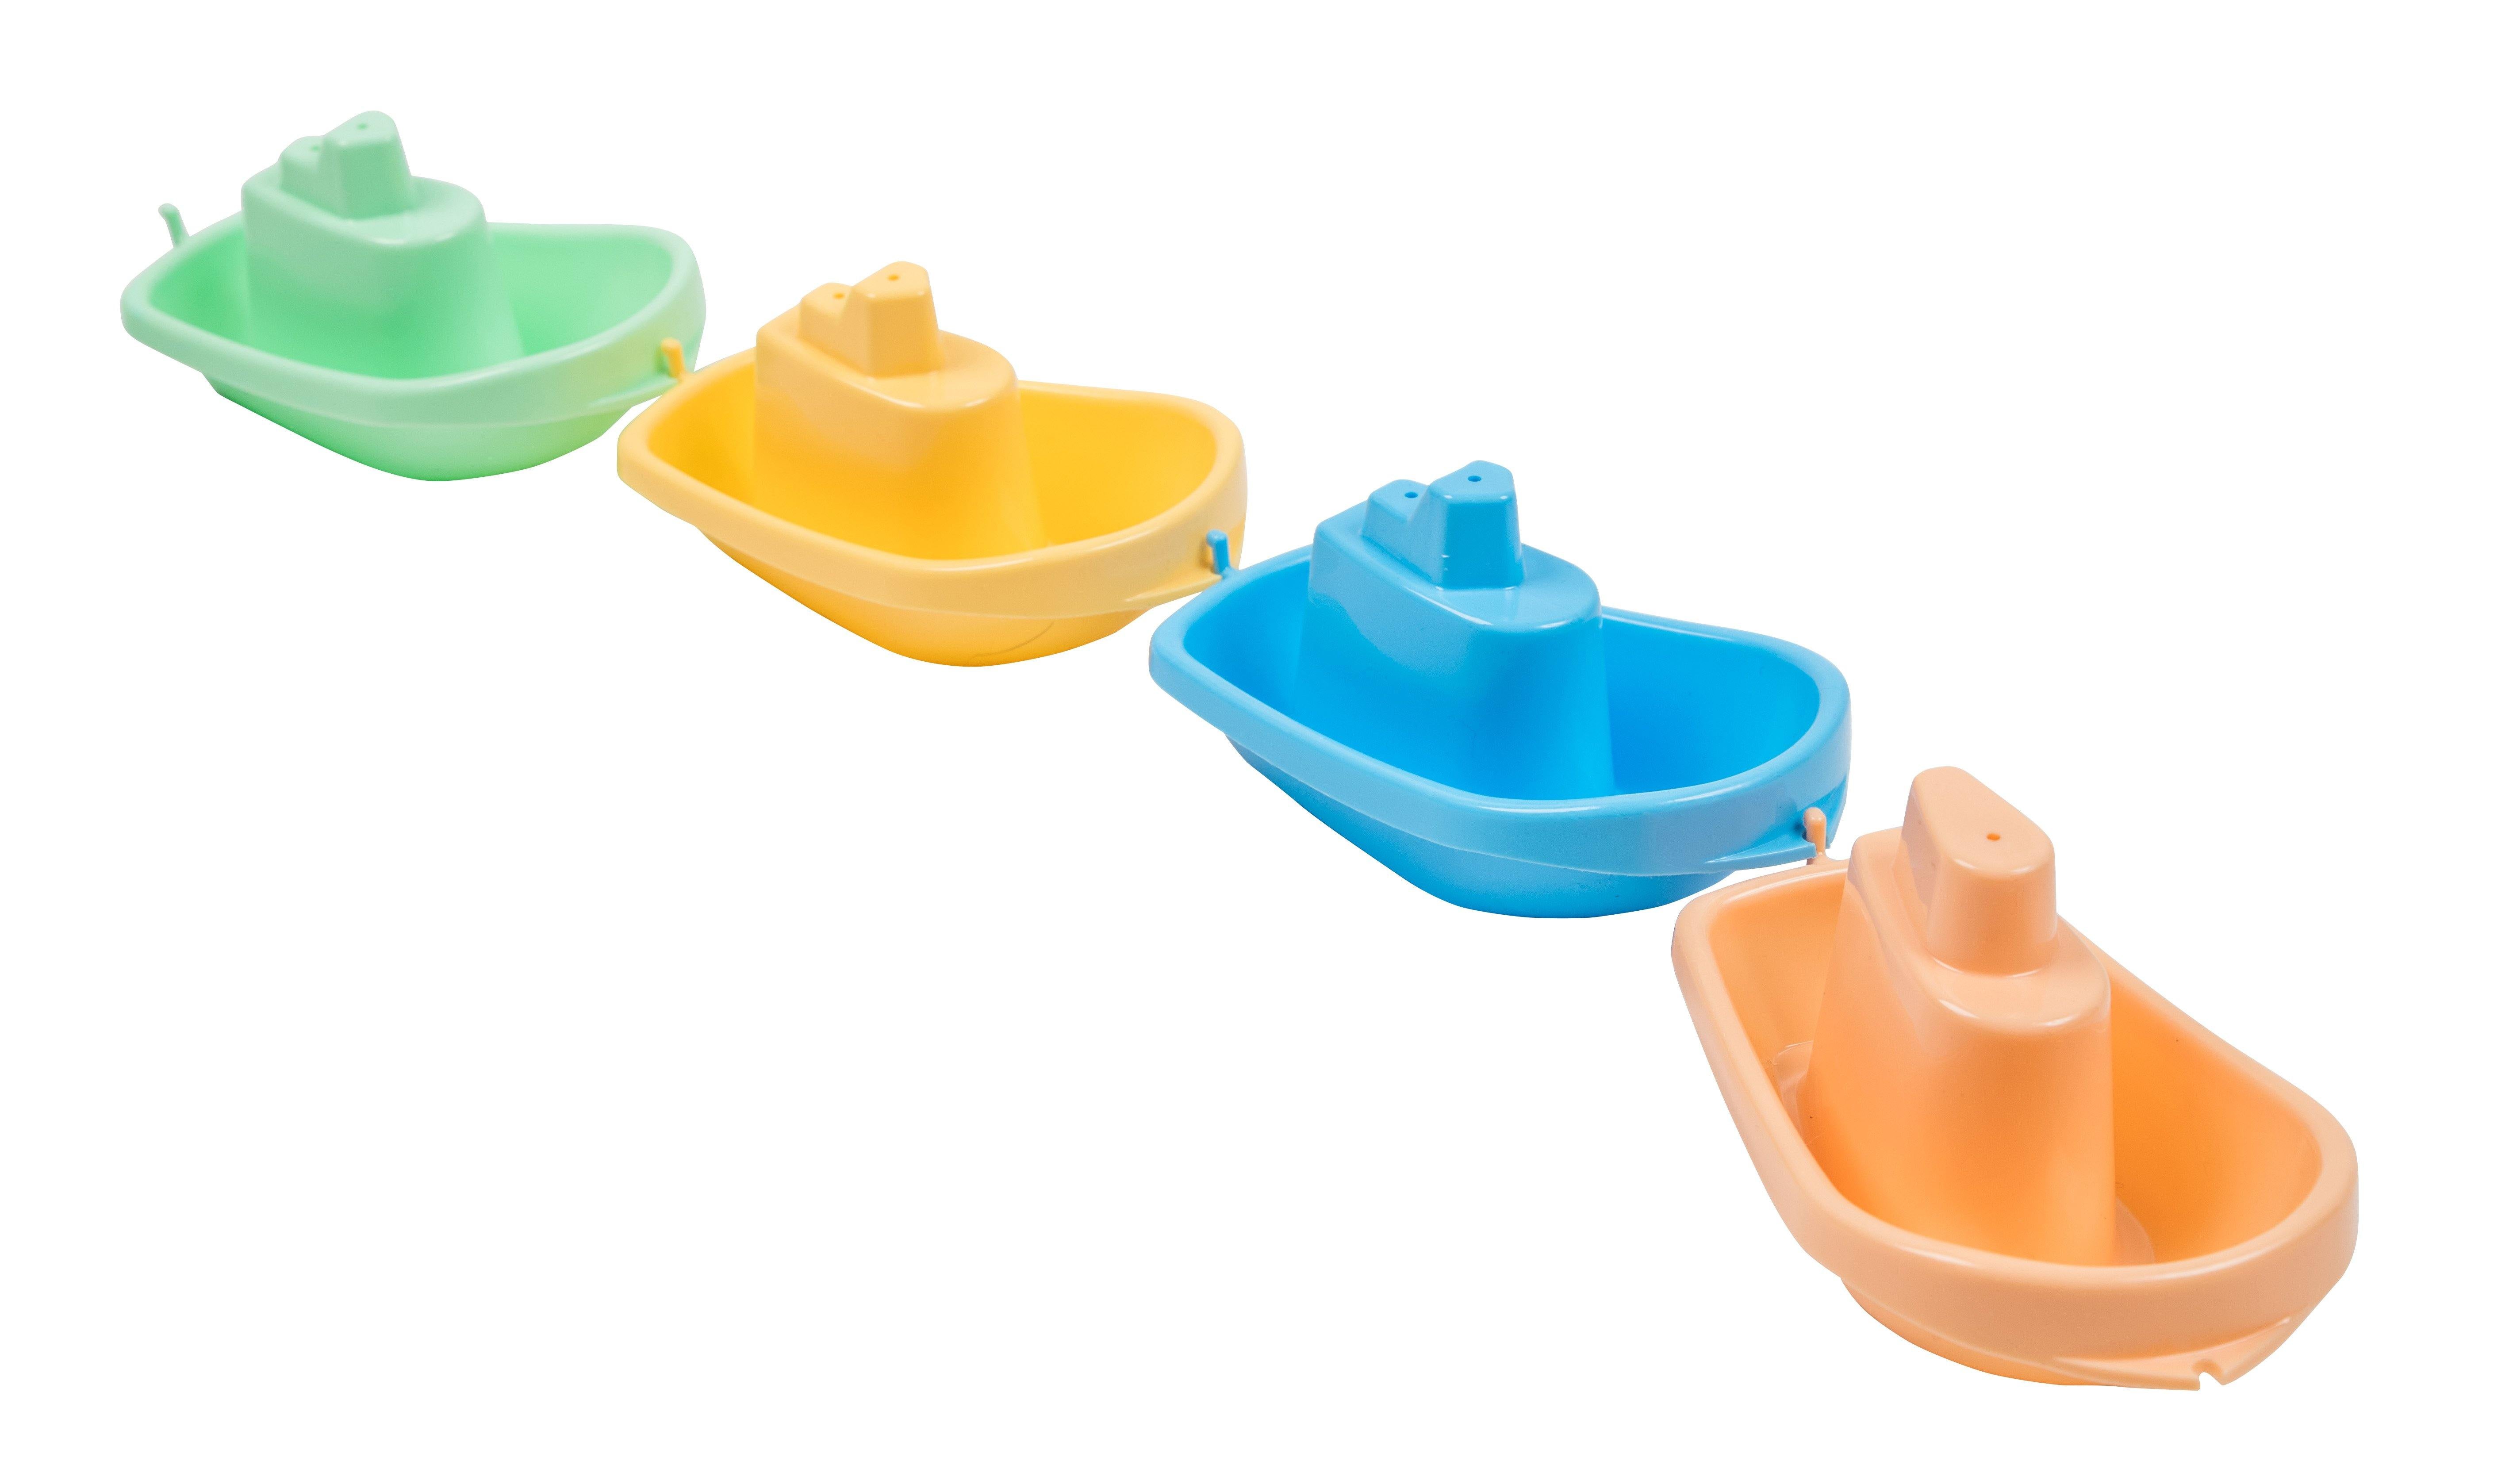 Bio plastic toy - 4 piece set of floating boats - T&M Toys